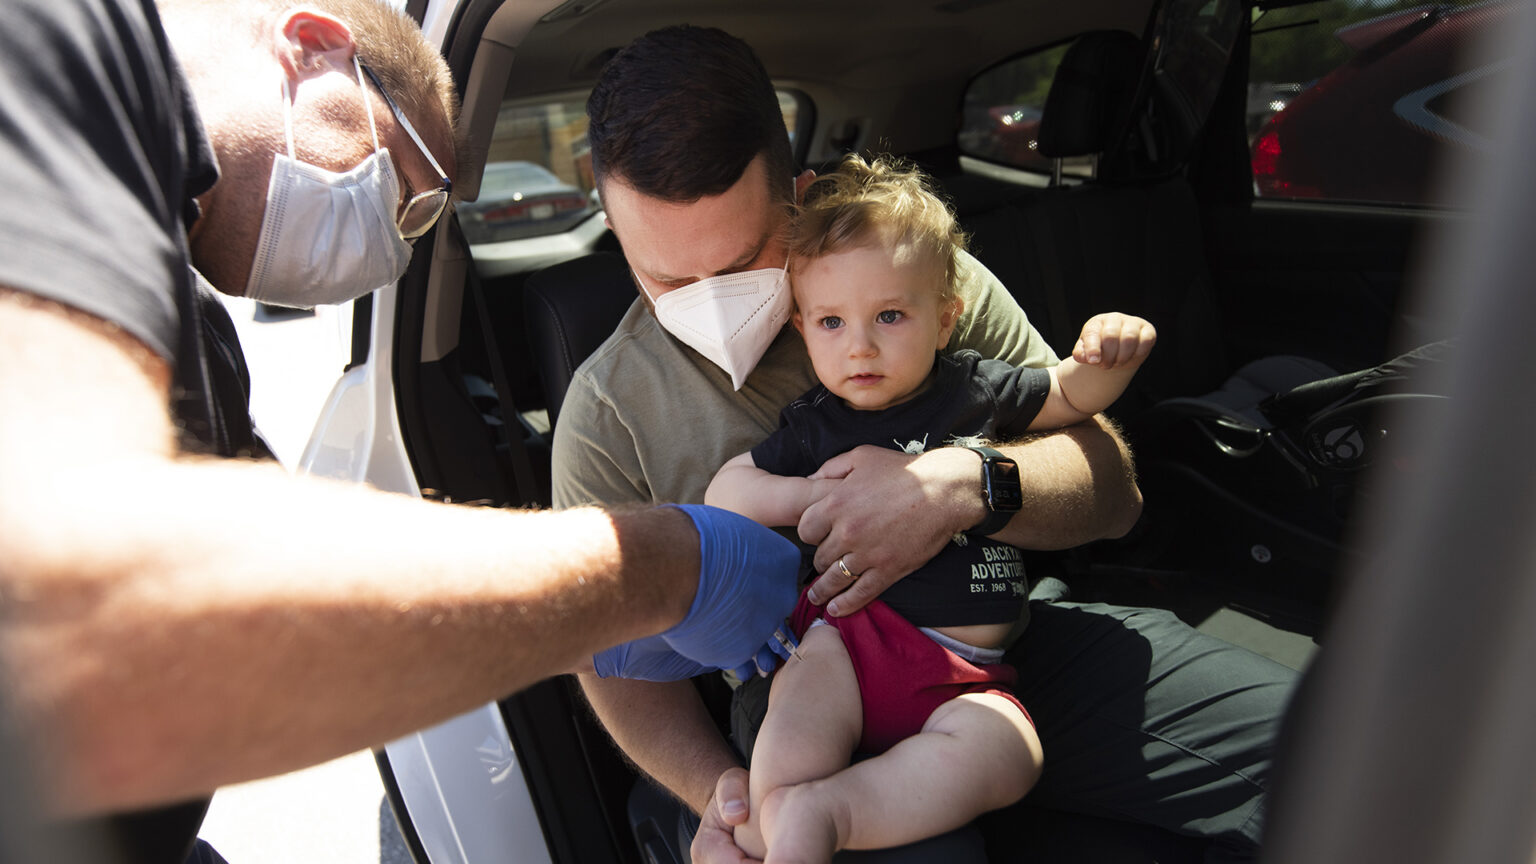 A toddler seated on the lap of an adult inside a car is given a shot in the thigh.